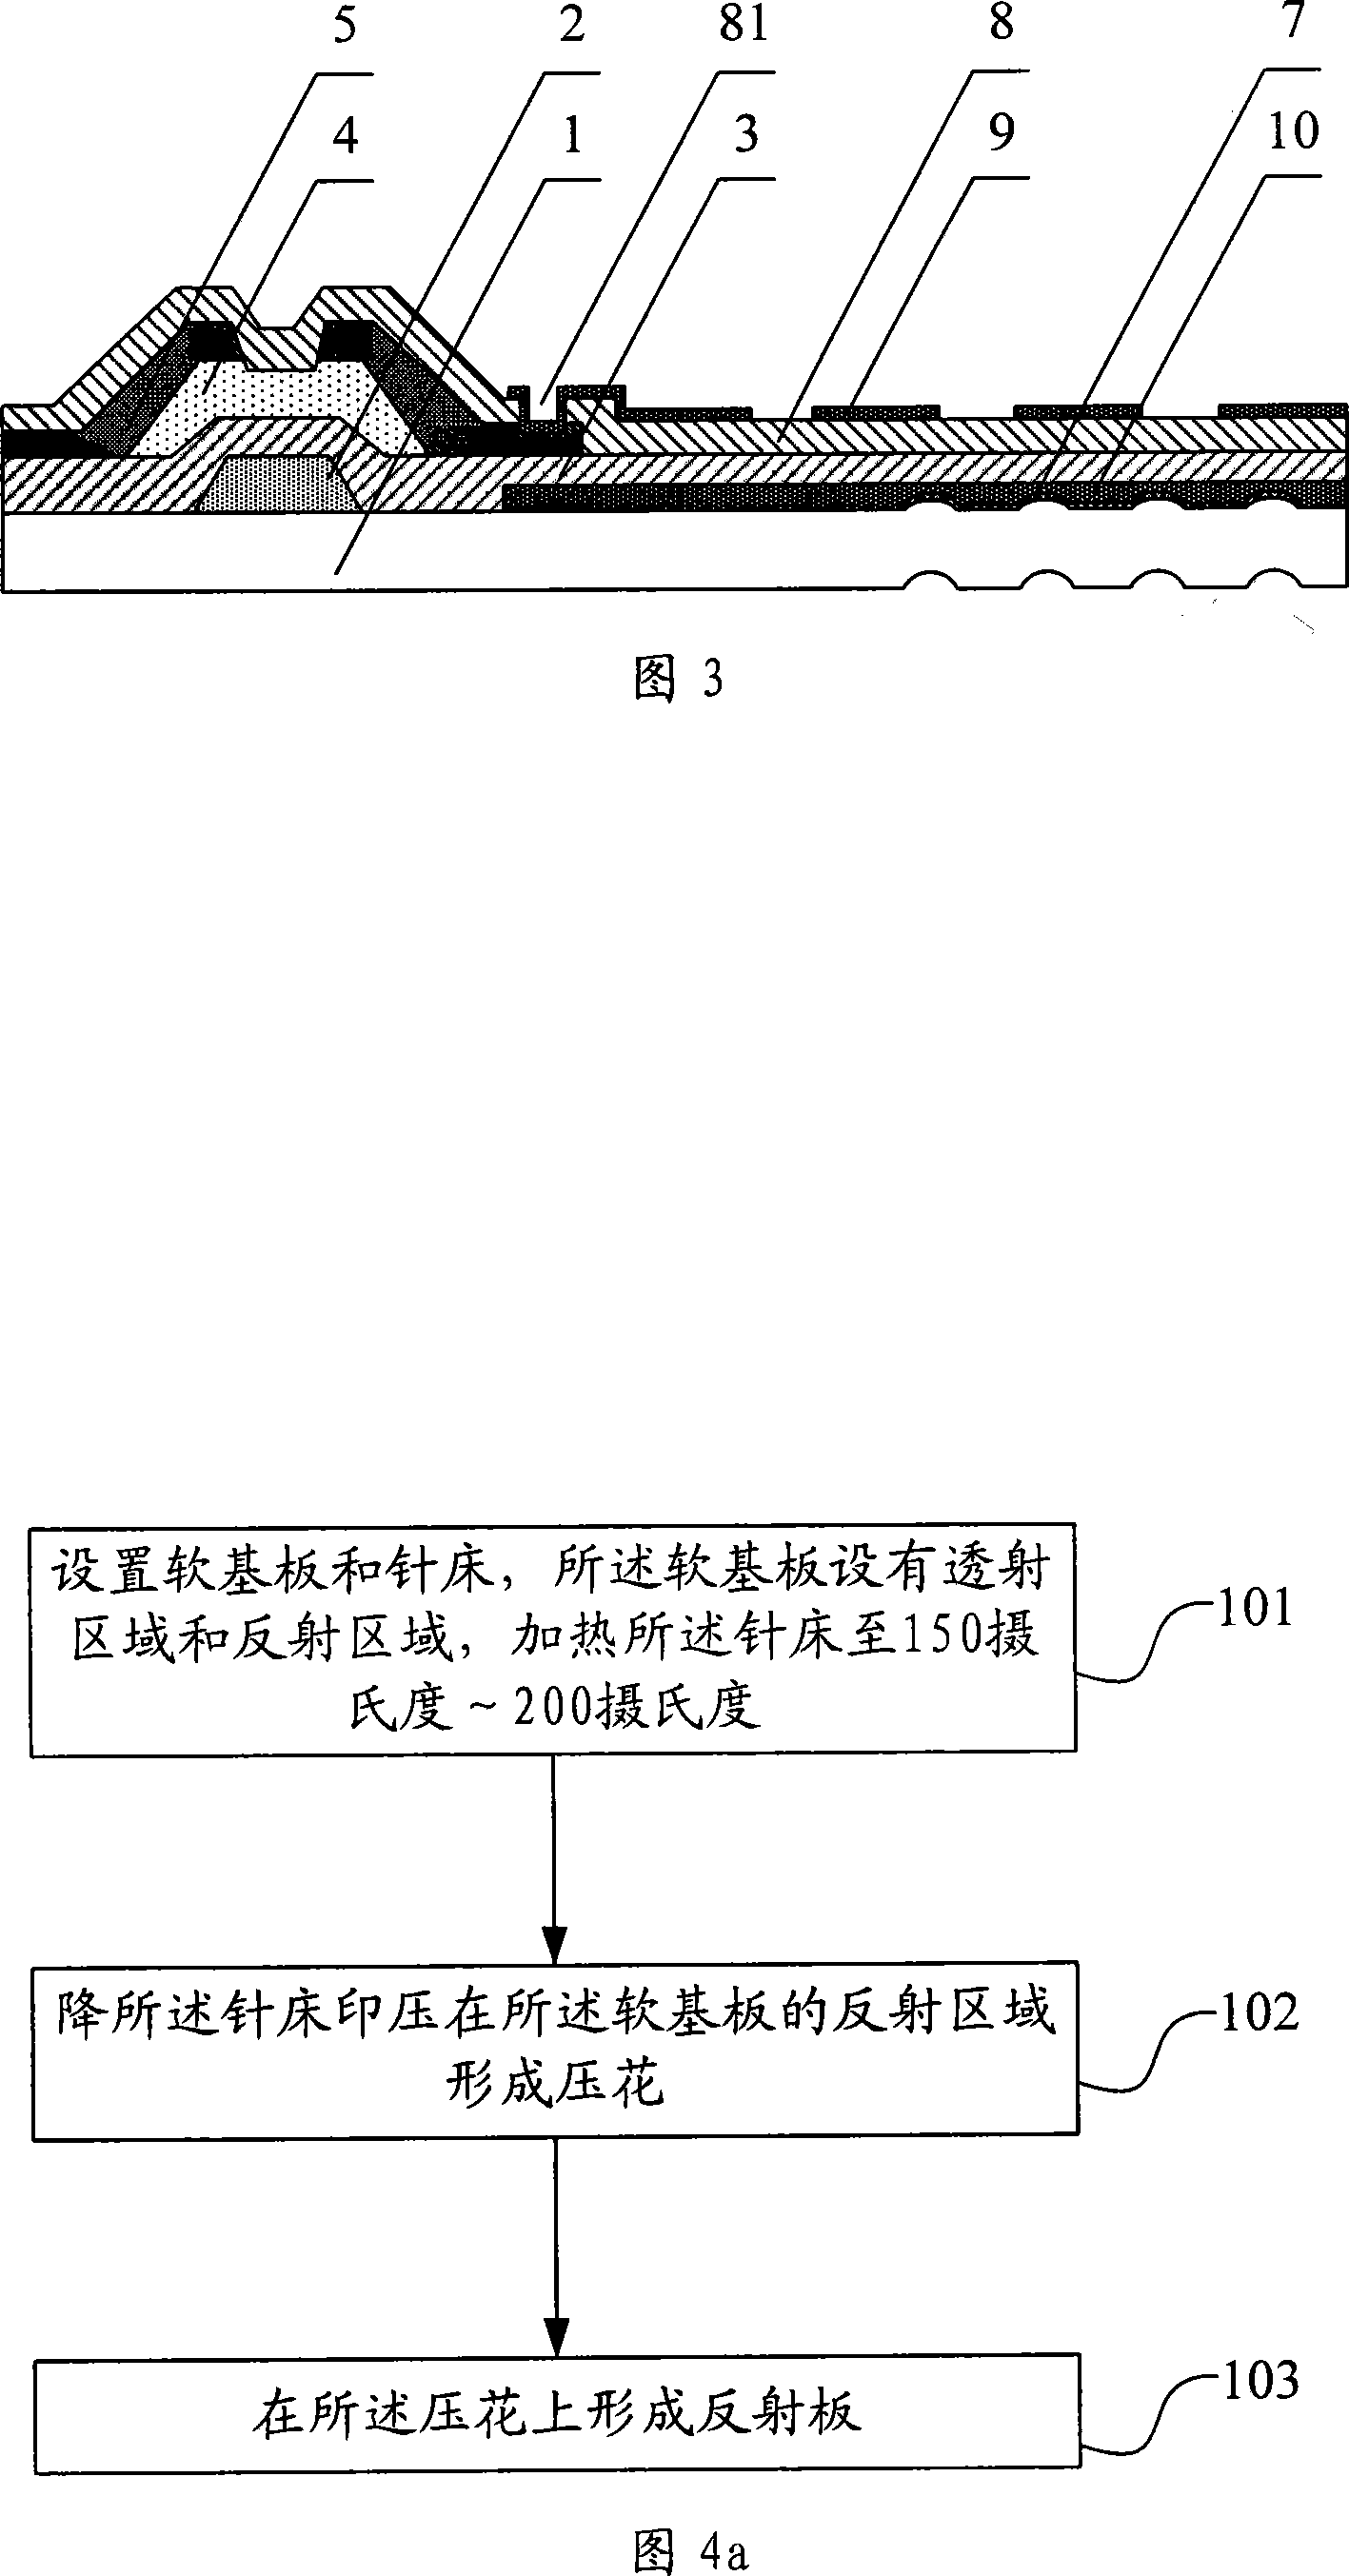 Reflection-permeation array substrate and method for manufacturing same